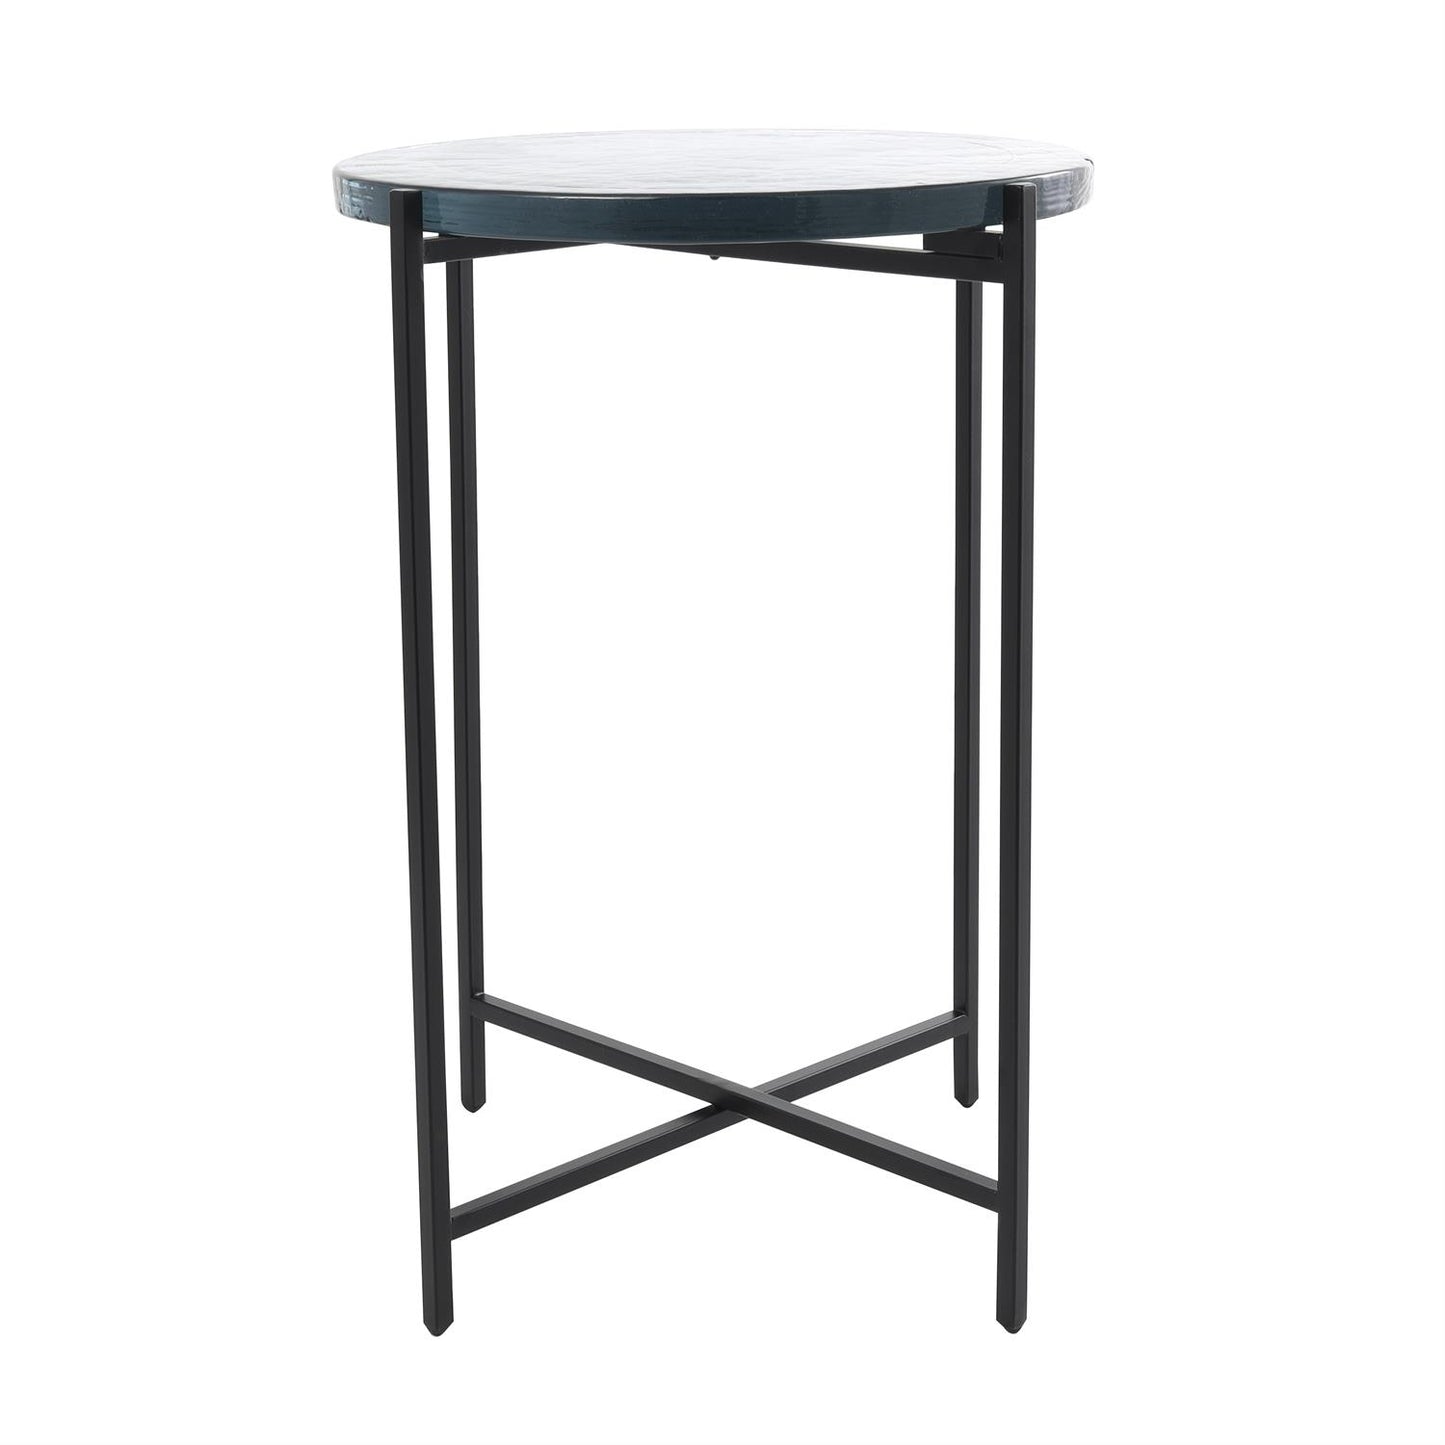 Glass and Metal Accent Table